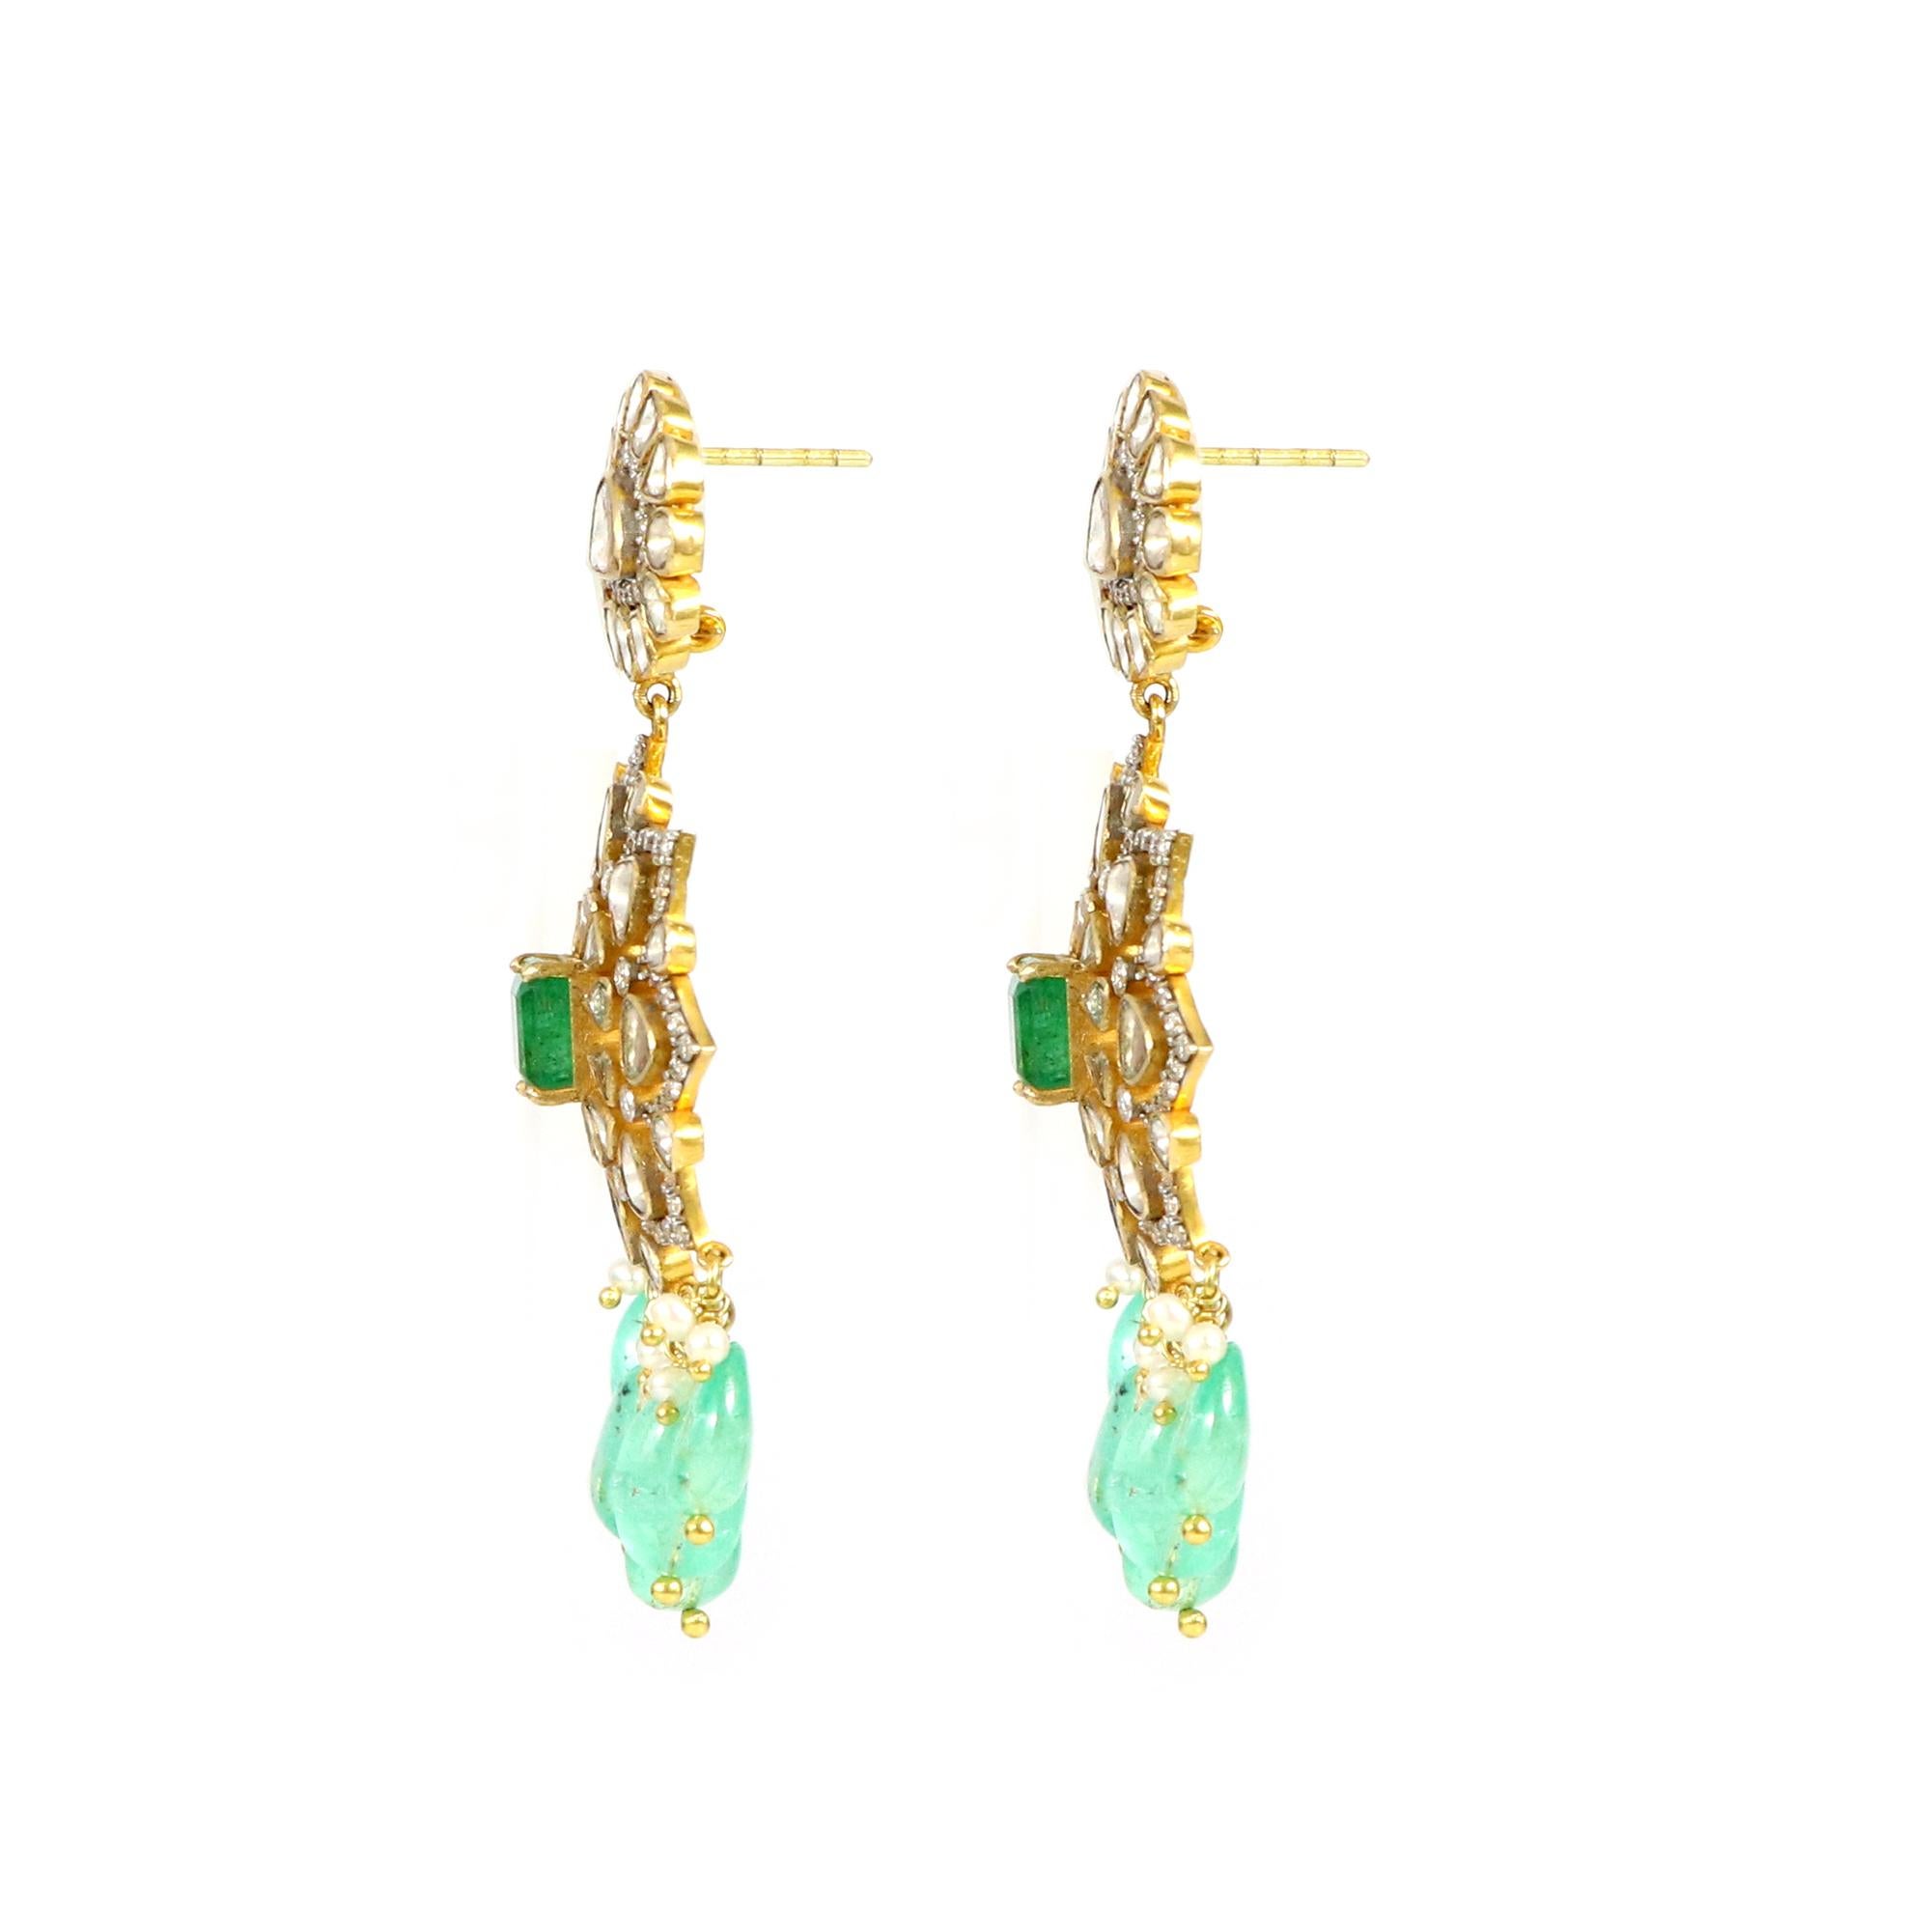 Behold this stunning pair of meticulously crafted earrings, a symphony of emeralds, polki diamonds, and 18K gold with an open setting. These earrings stand as a testament to unparalleled elegance and sophistication. With their timeless beauty and